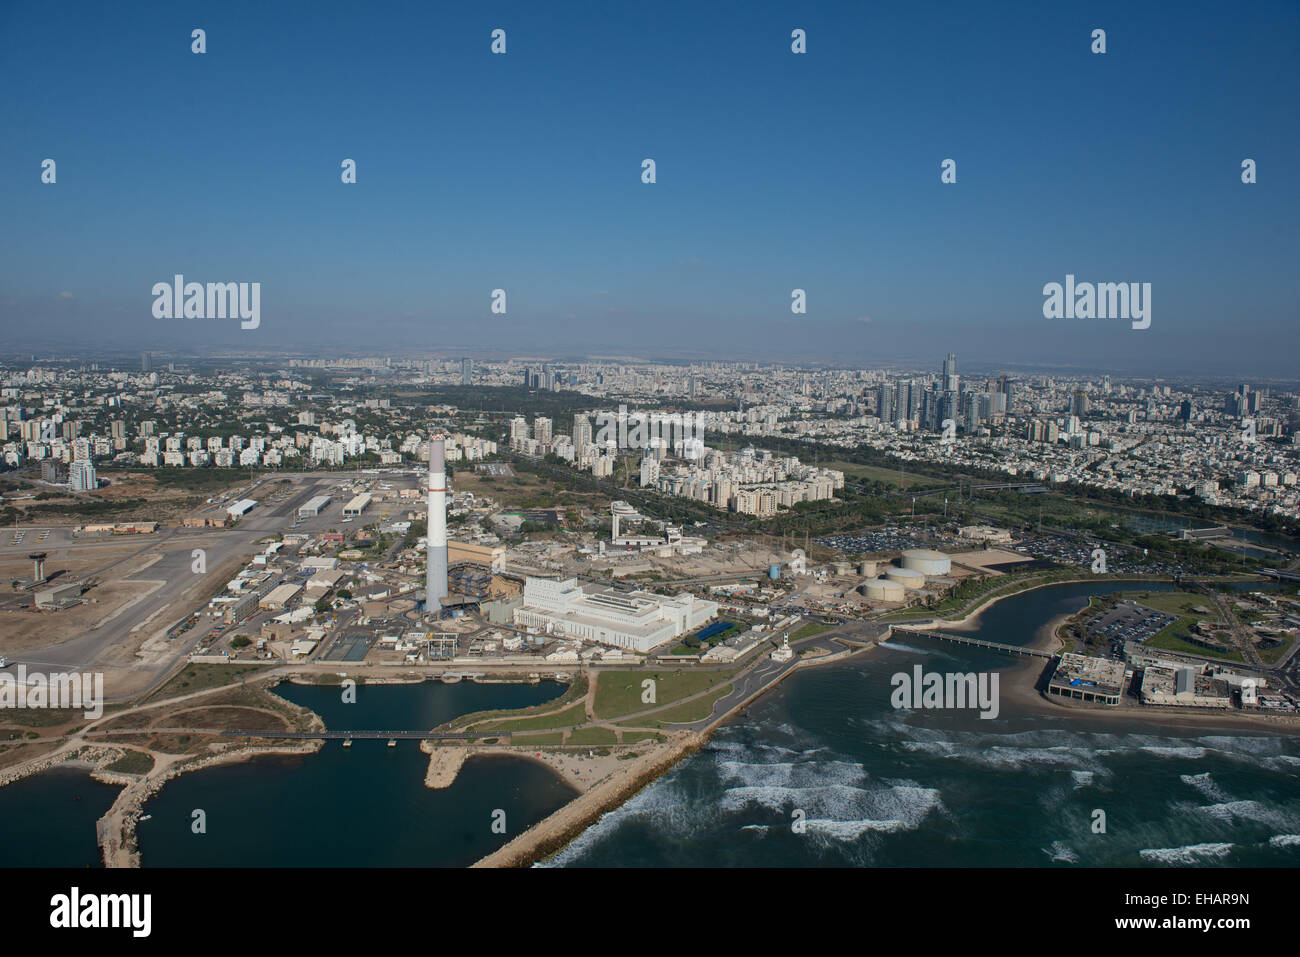 Aerial Photography of Tel Aviv, Israel The flue of the Reading power plant can be seen Stock Photo